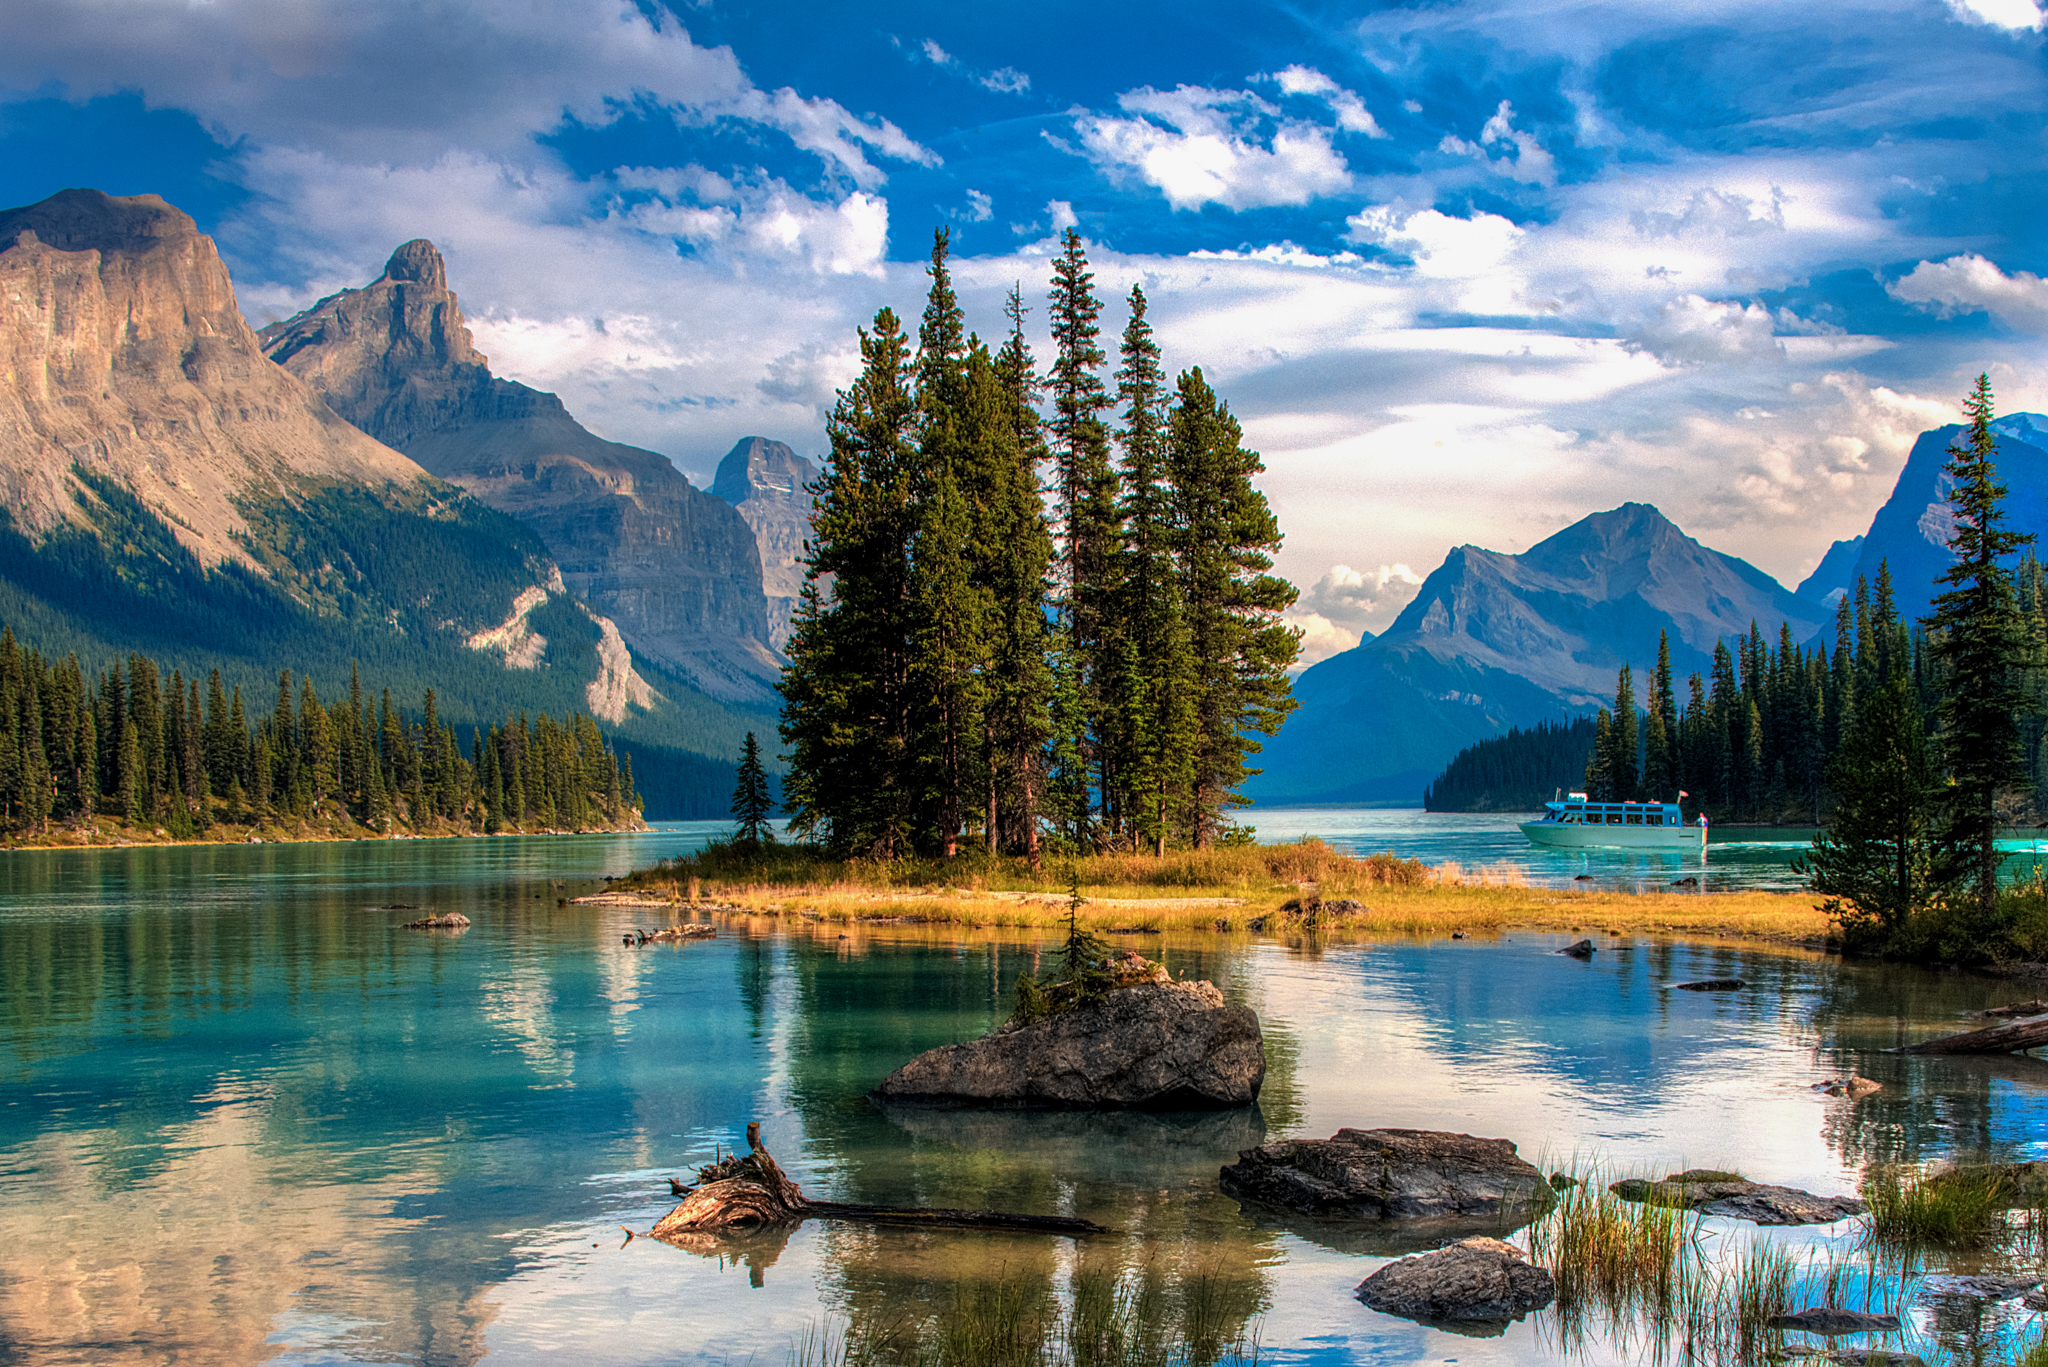 Spirit island on Maligne Lake, overlooking the Canadian Rockies in Jasper National Park, perfect for canoeing.